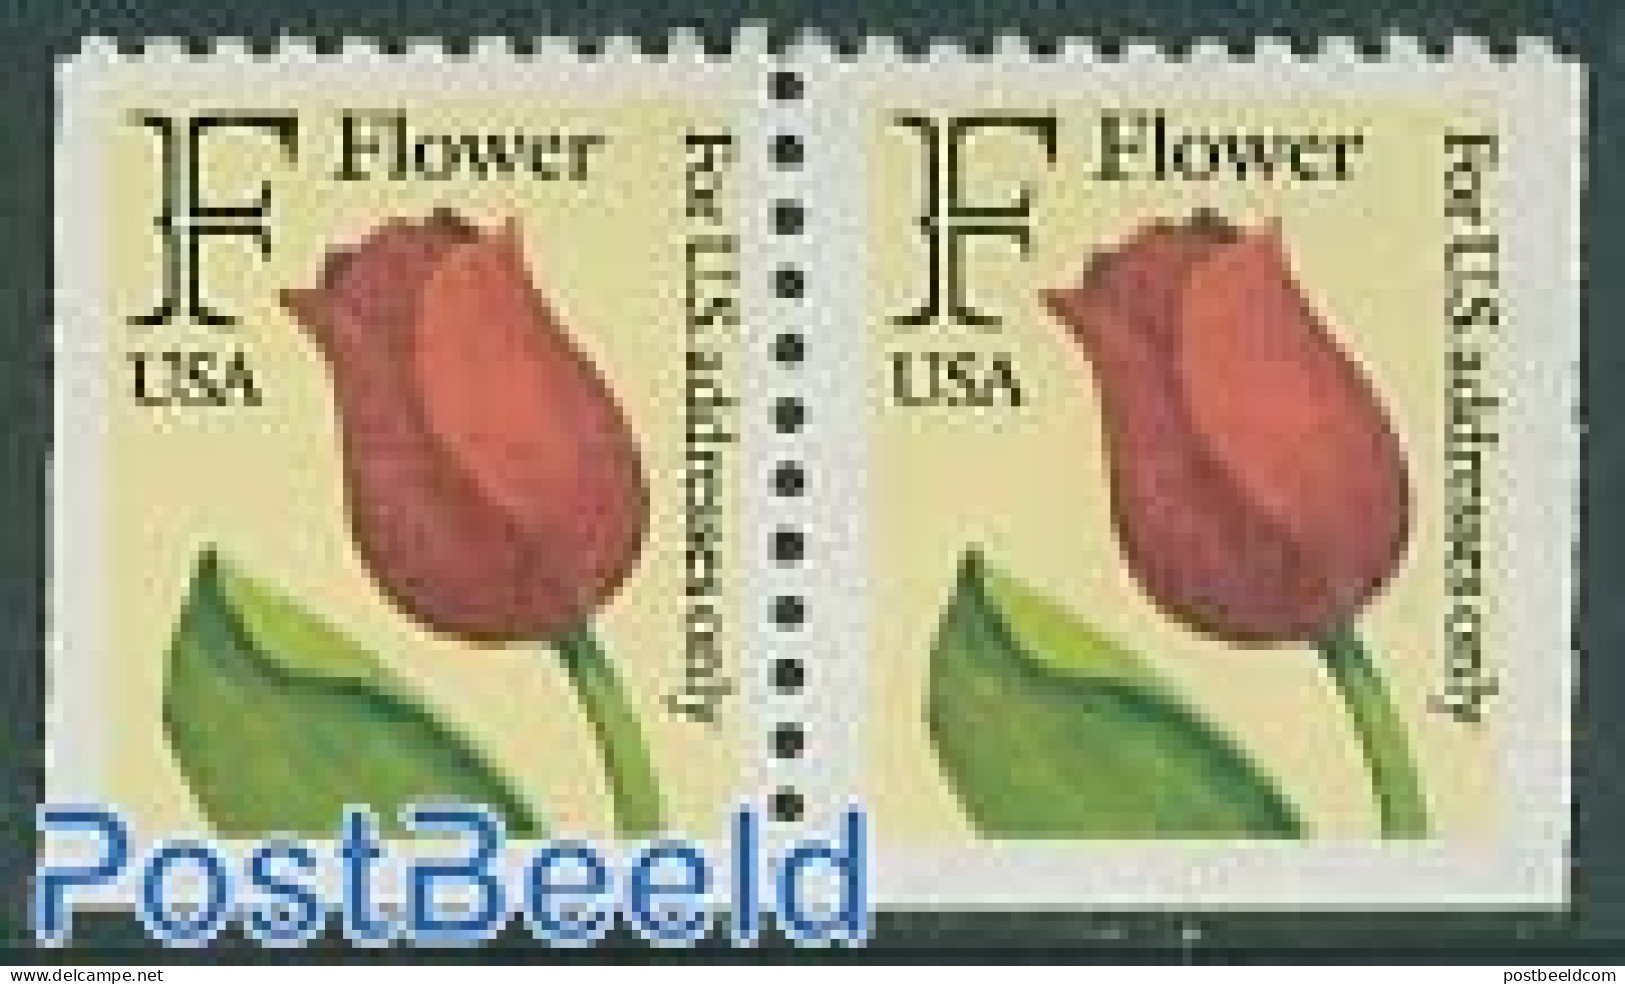 United States Of America 1991 Tulip Bottom Booklet Pair Perf. 11, Mint NH, Nature - Flowers & Plants - Ungebraucht